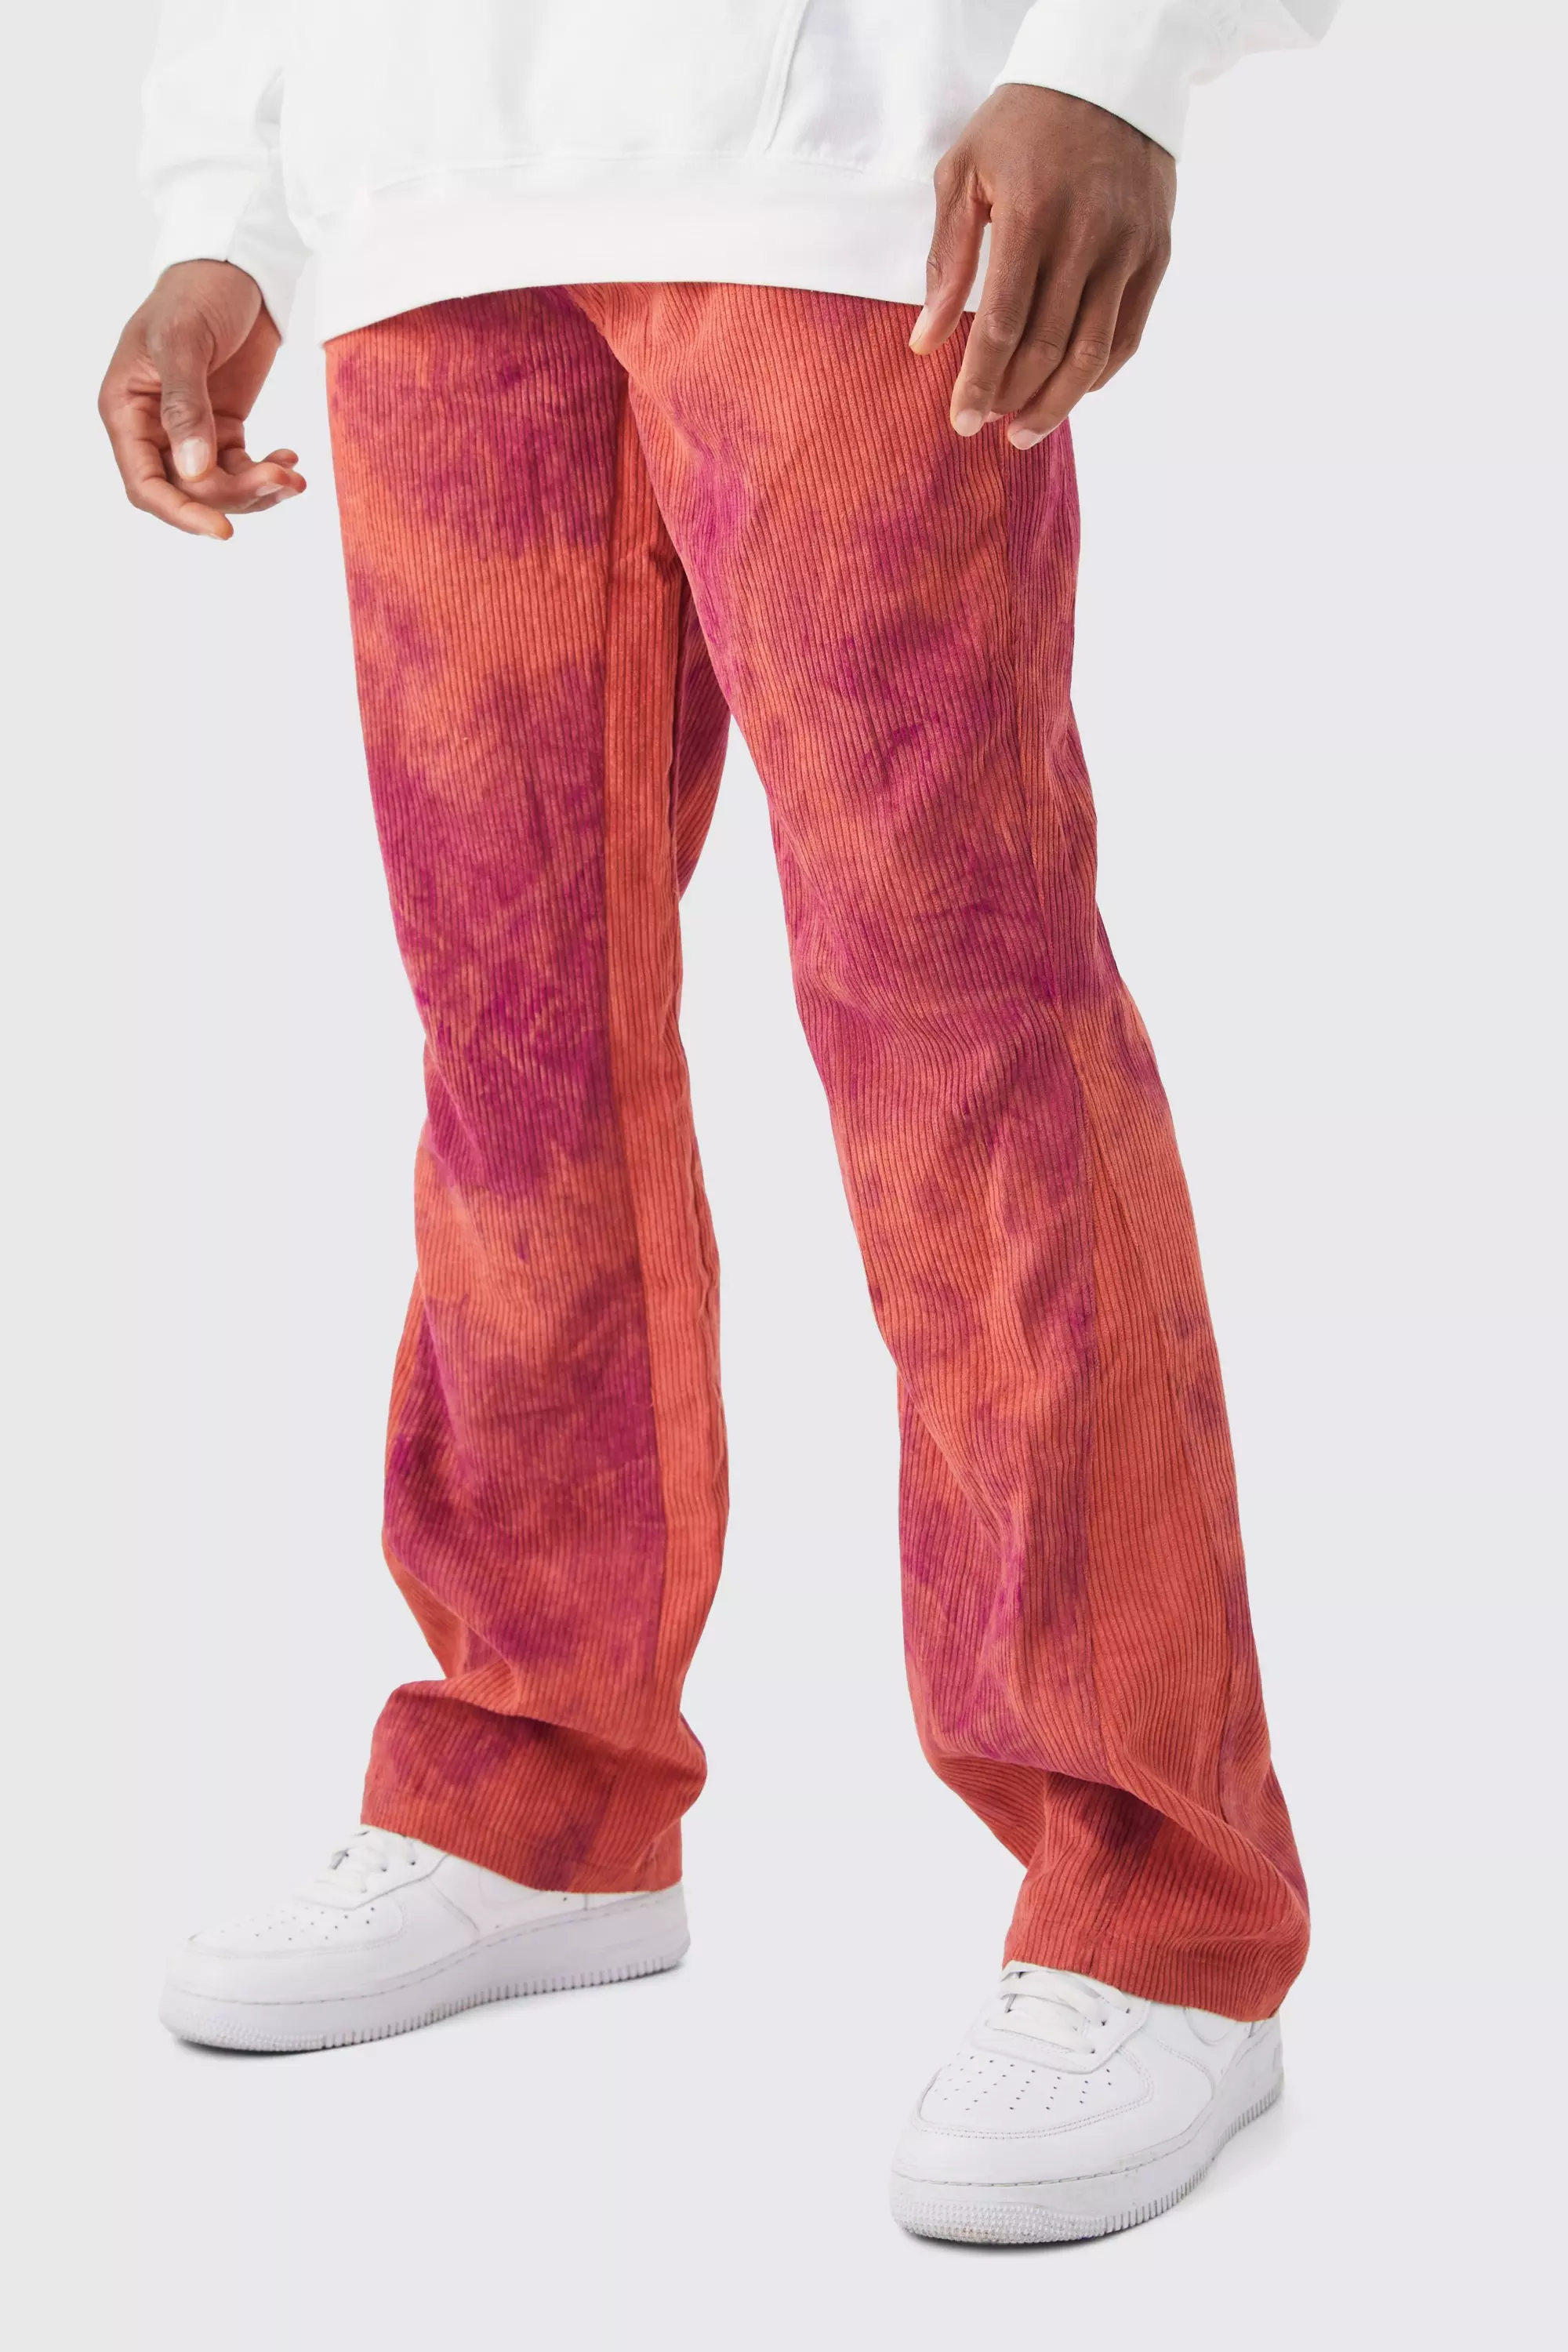 INFLATION Mens Pink Wide Leg High Street Washed Denim Pants Unisex Baggy  Baggy Trousers Mens In Plus Size 230827 From Cong04, $39.16